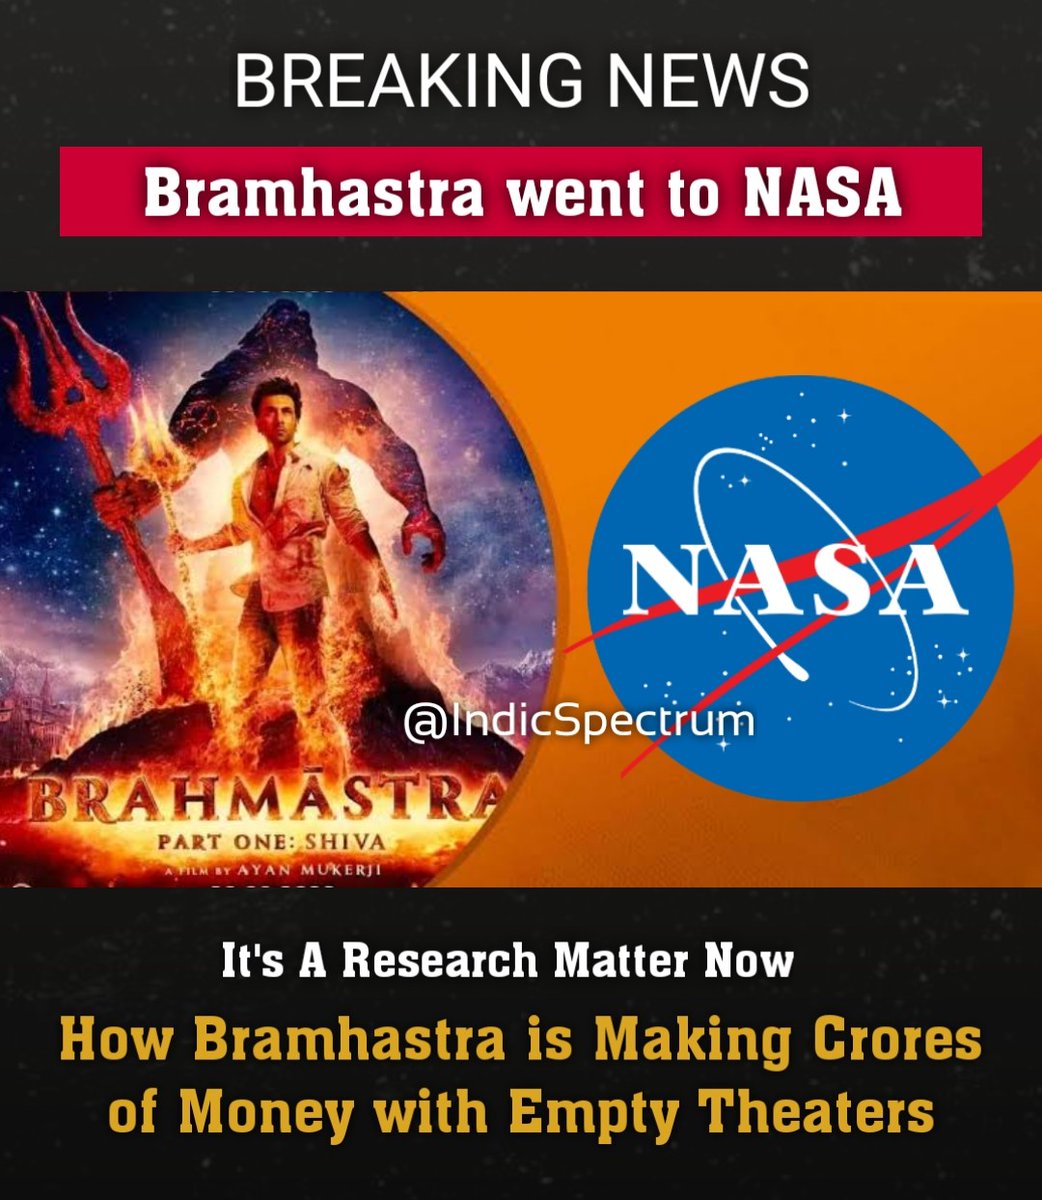 #brahmastraboxoffice #KaranJohar
Have Ninja Technique to Earn Crores Without Audience in Theatre  #brahmastraboxoffice 
#BrahmastraMovie